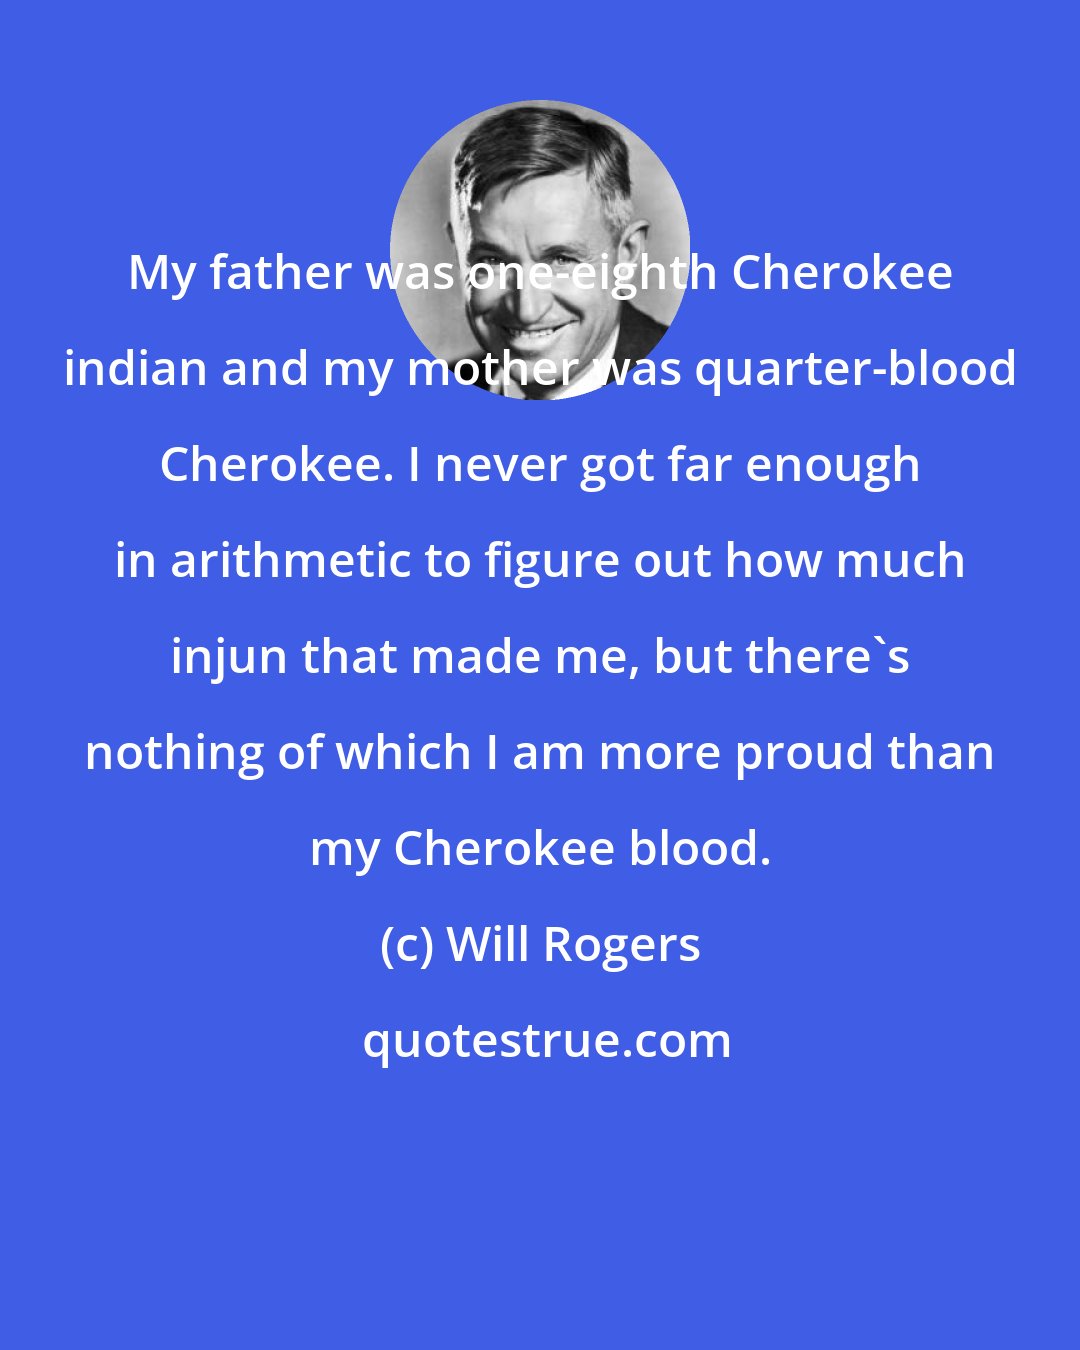 Will Rogers: My father was one-eighth Cherokee indian and my mother was quarter-blood Cherokee. I never got far enough in arithmetic to figure out how much injun that made me, but there's nothing of which I am more proud than my Cherokee blood.